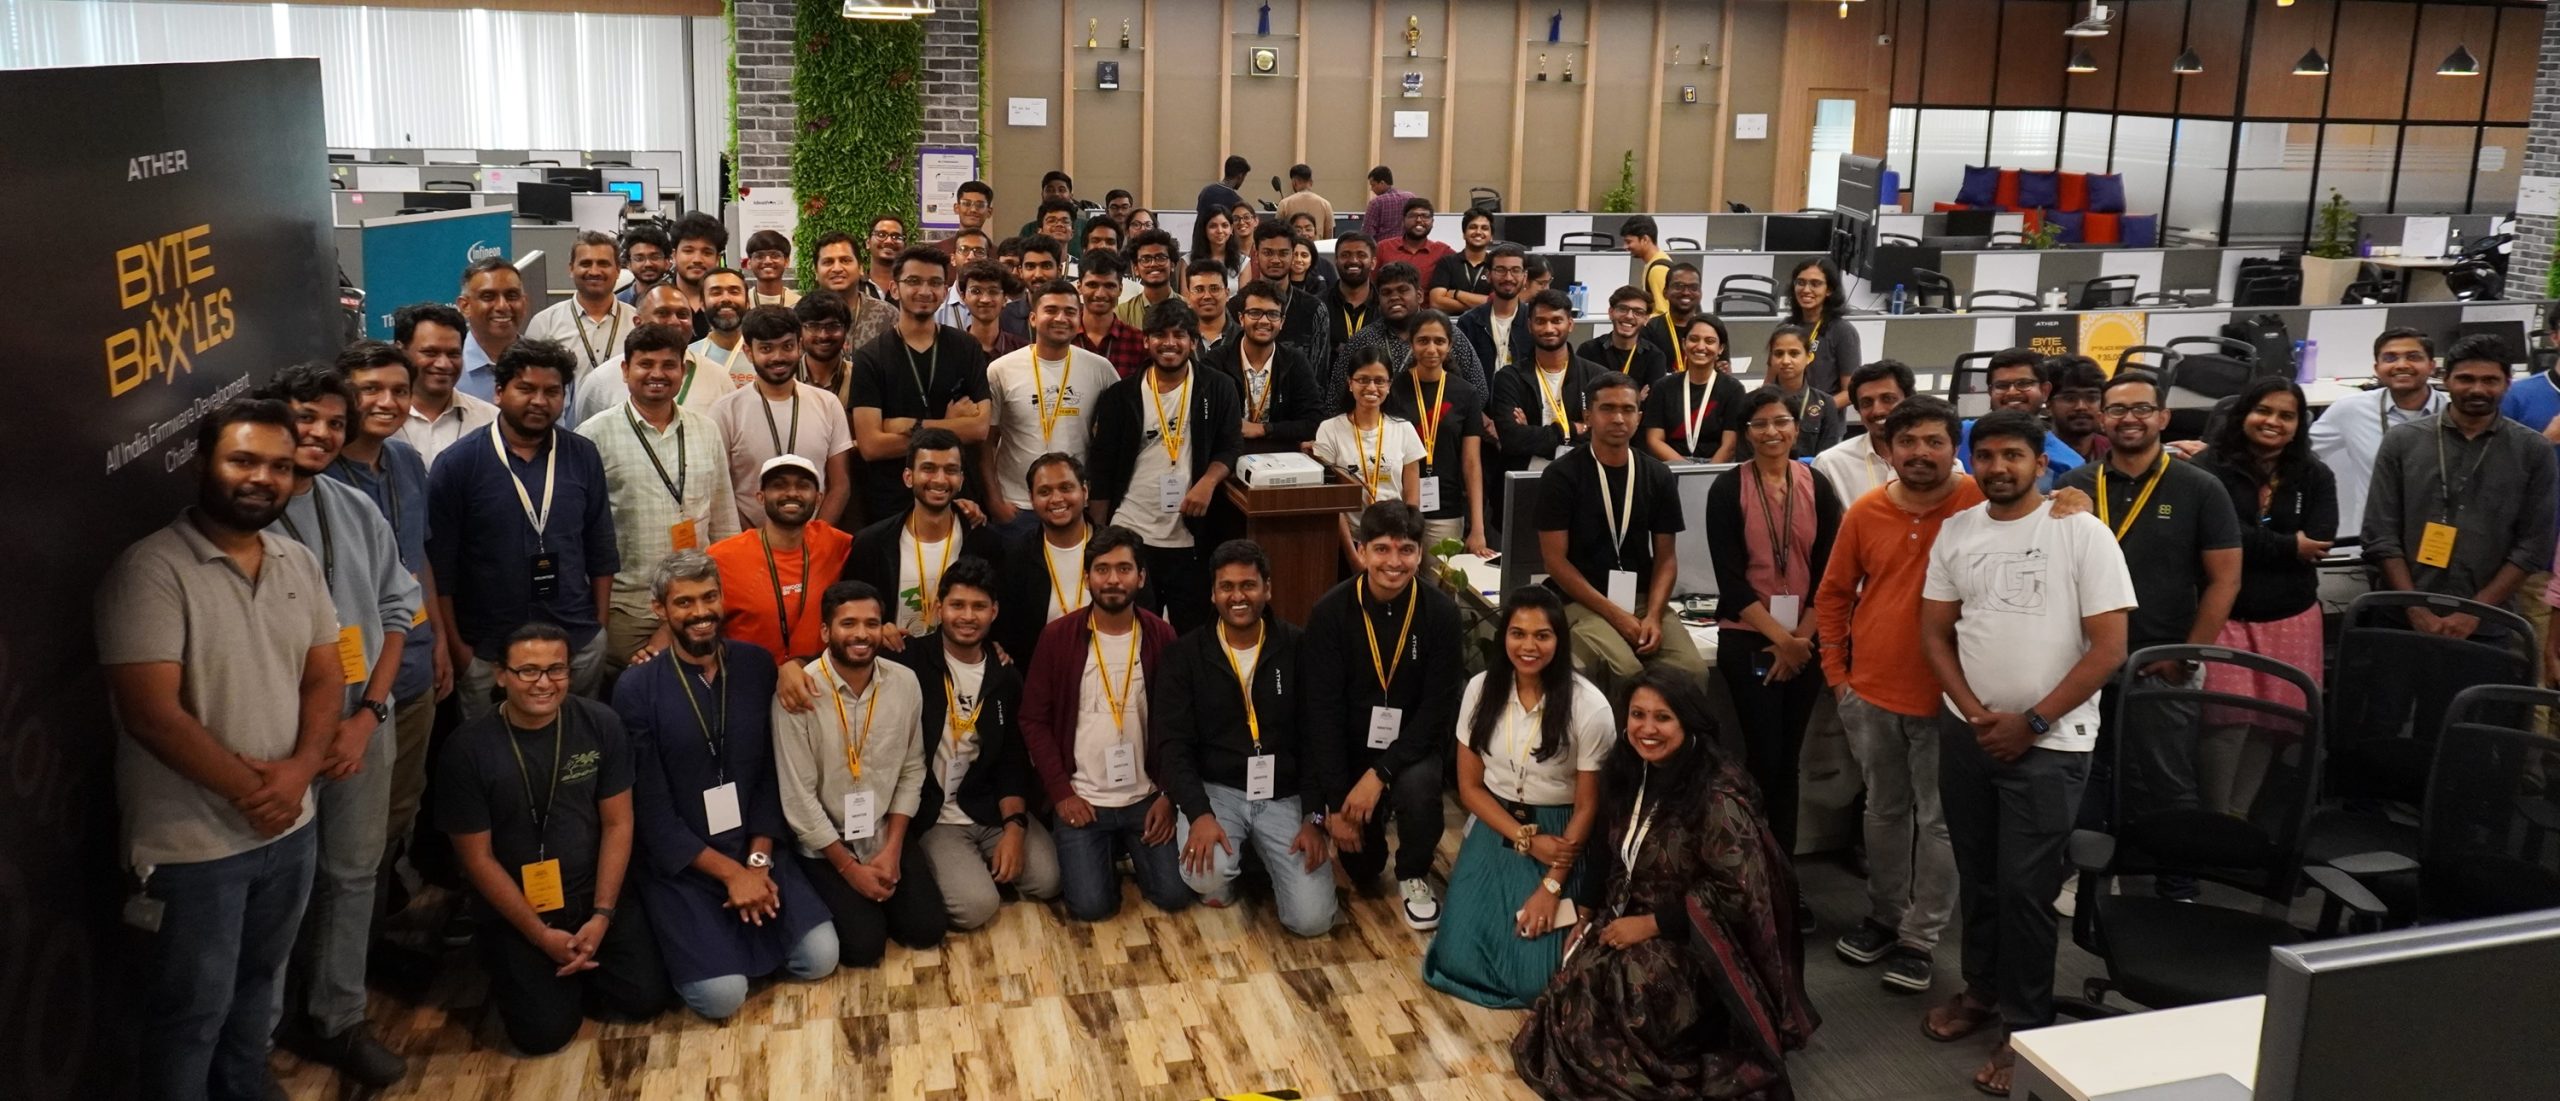 Ather Energy hosts all-India firmware challenge with Infineon & Elektrobit